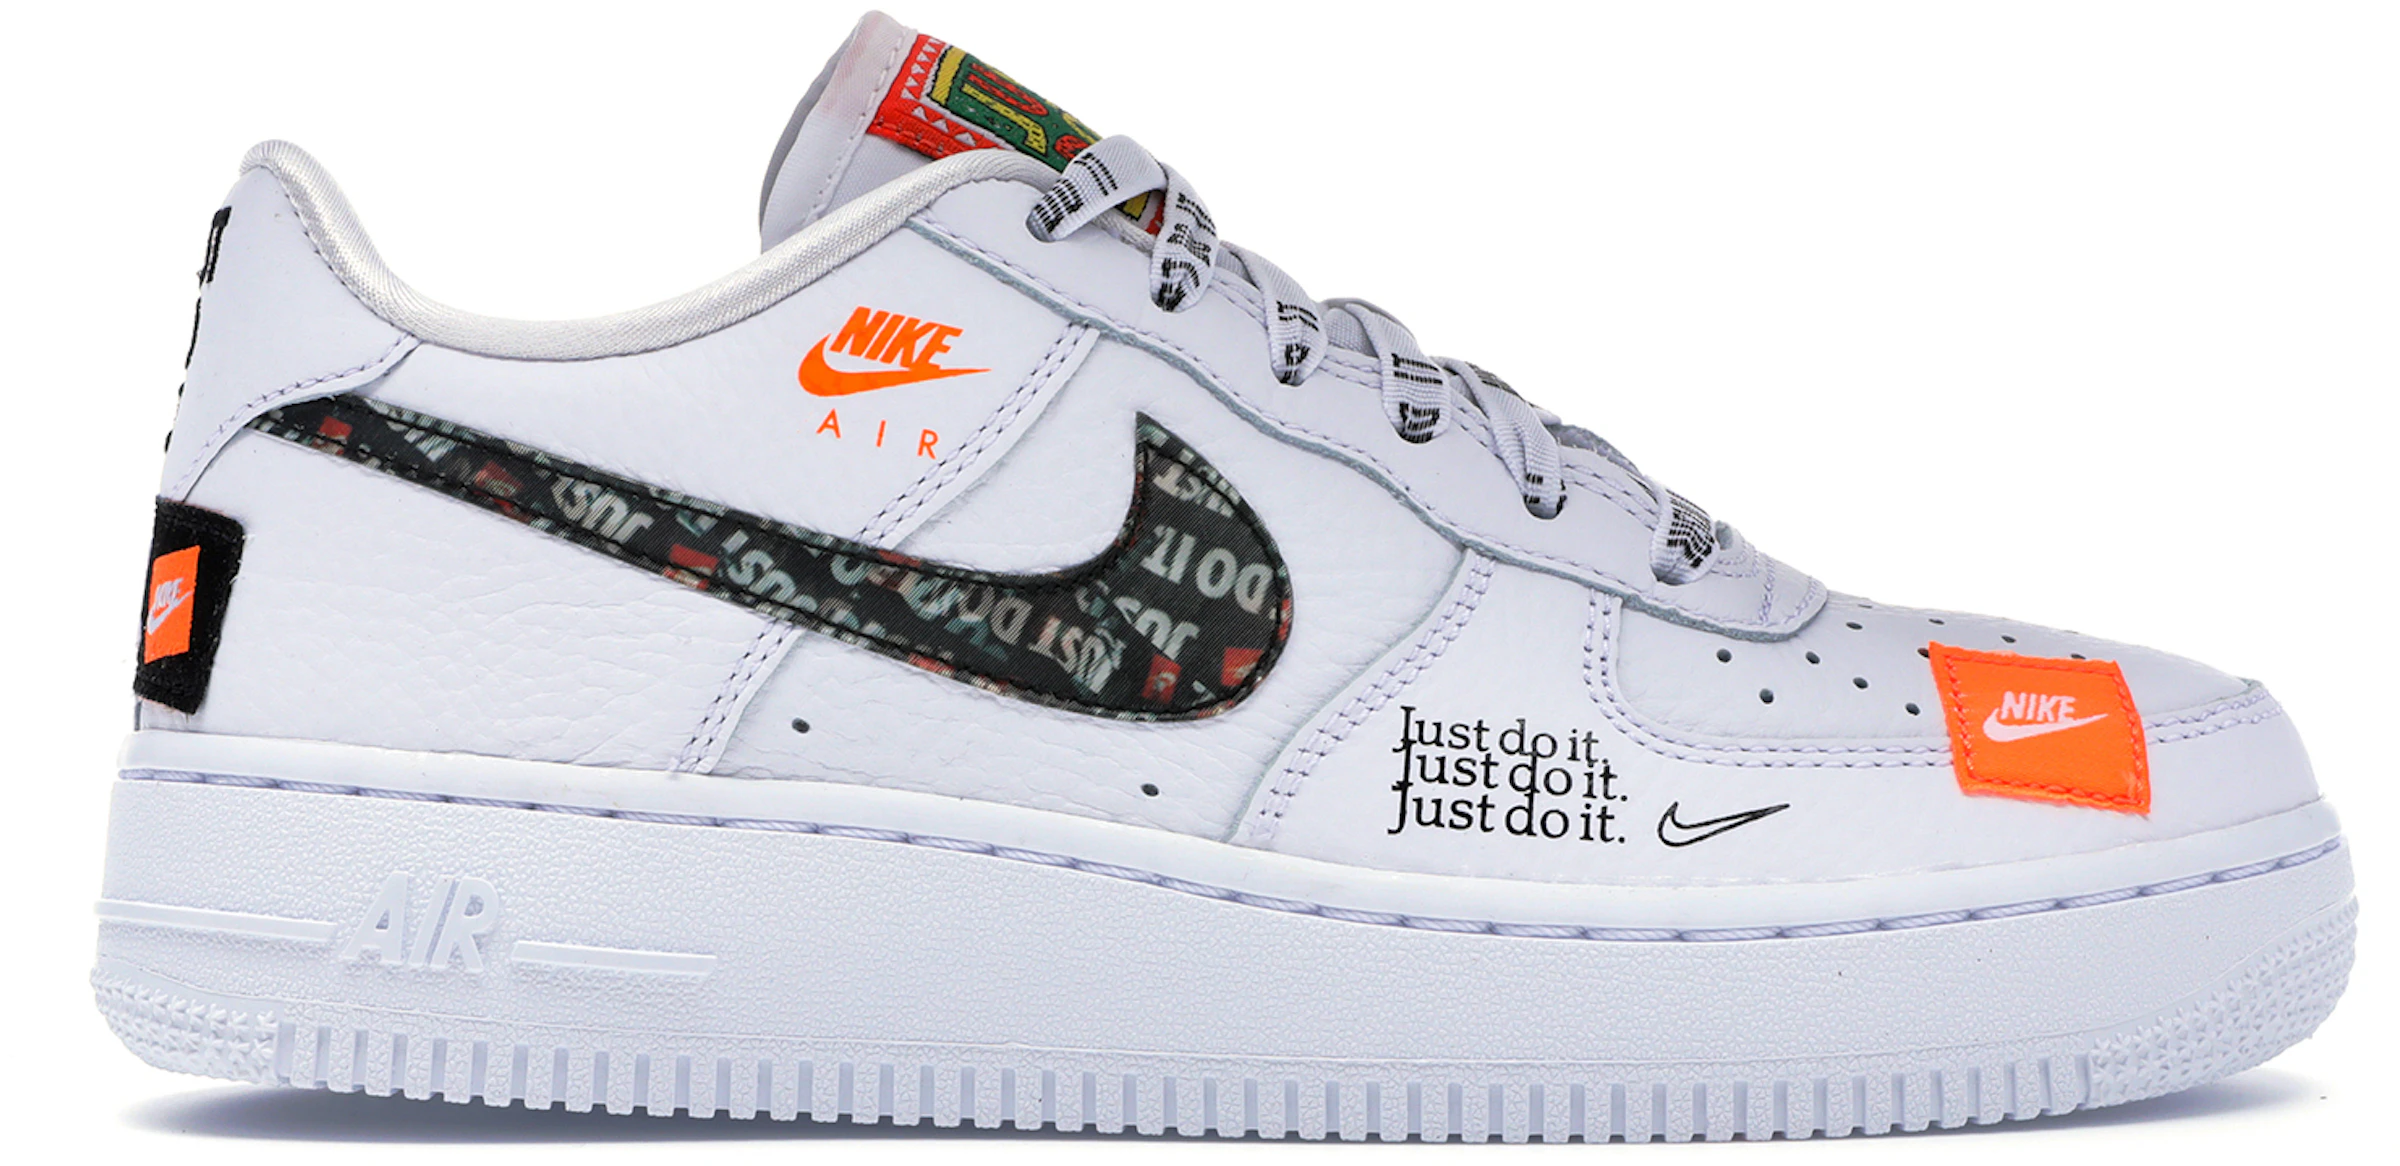 equipaje escalera mecánica Contabilidad Nike Air Force 1 Low Just Do It Pack White (GS) - AO3977-100 - ES